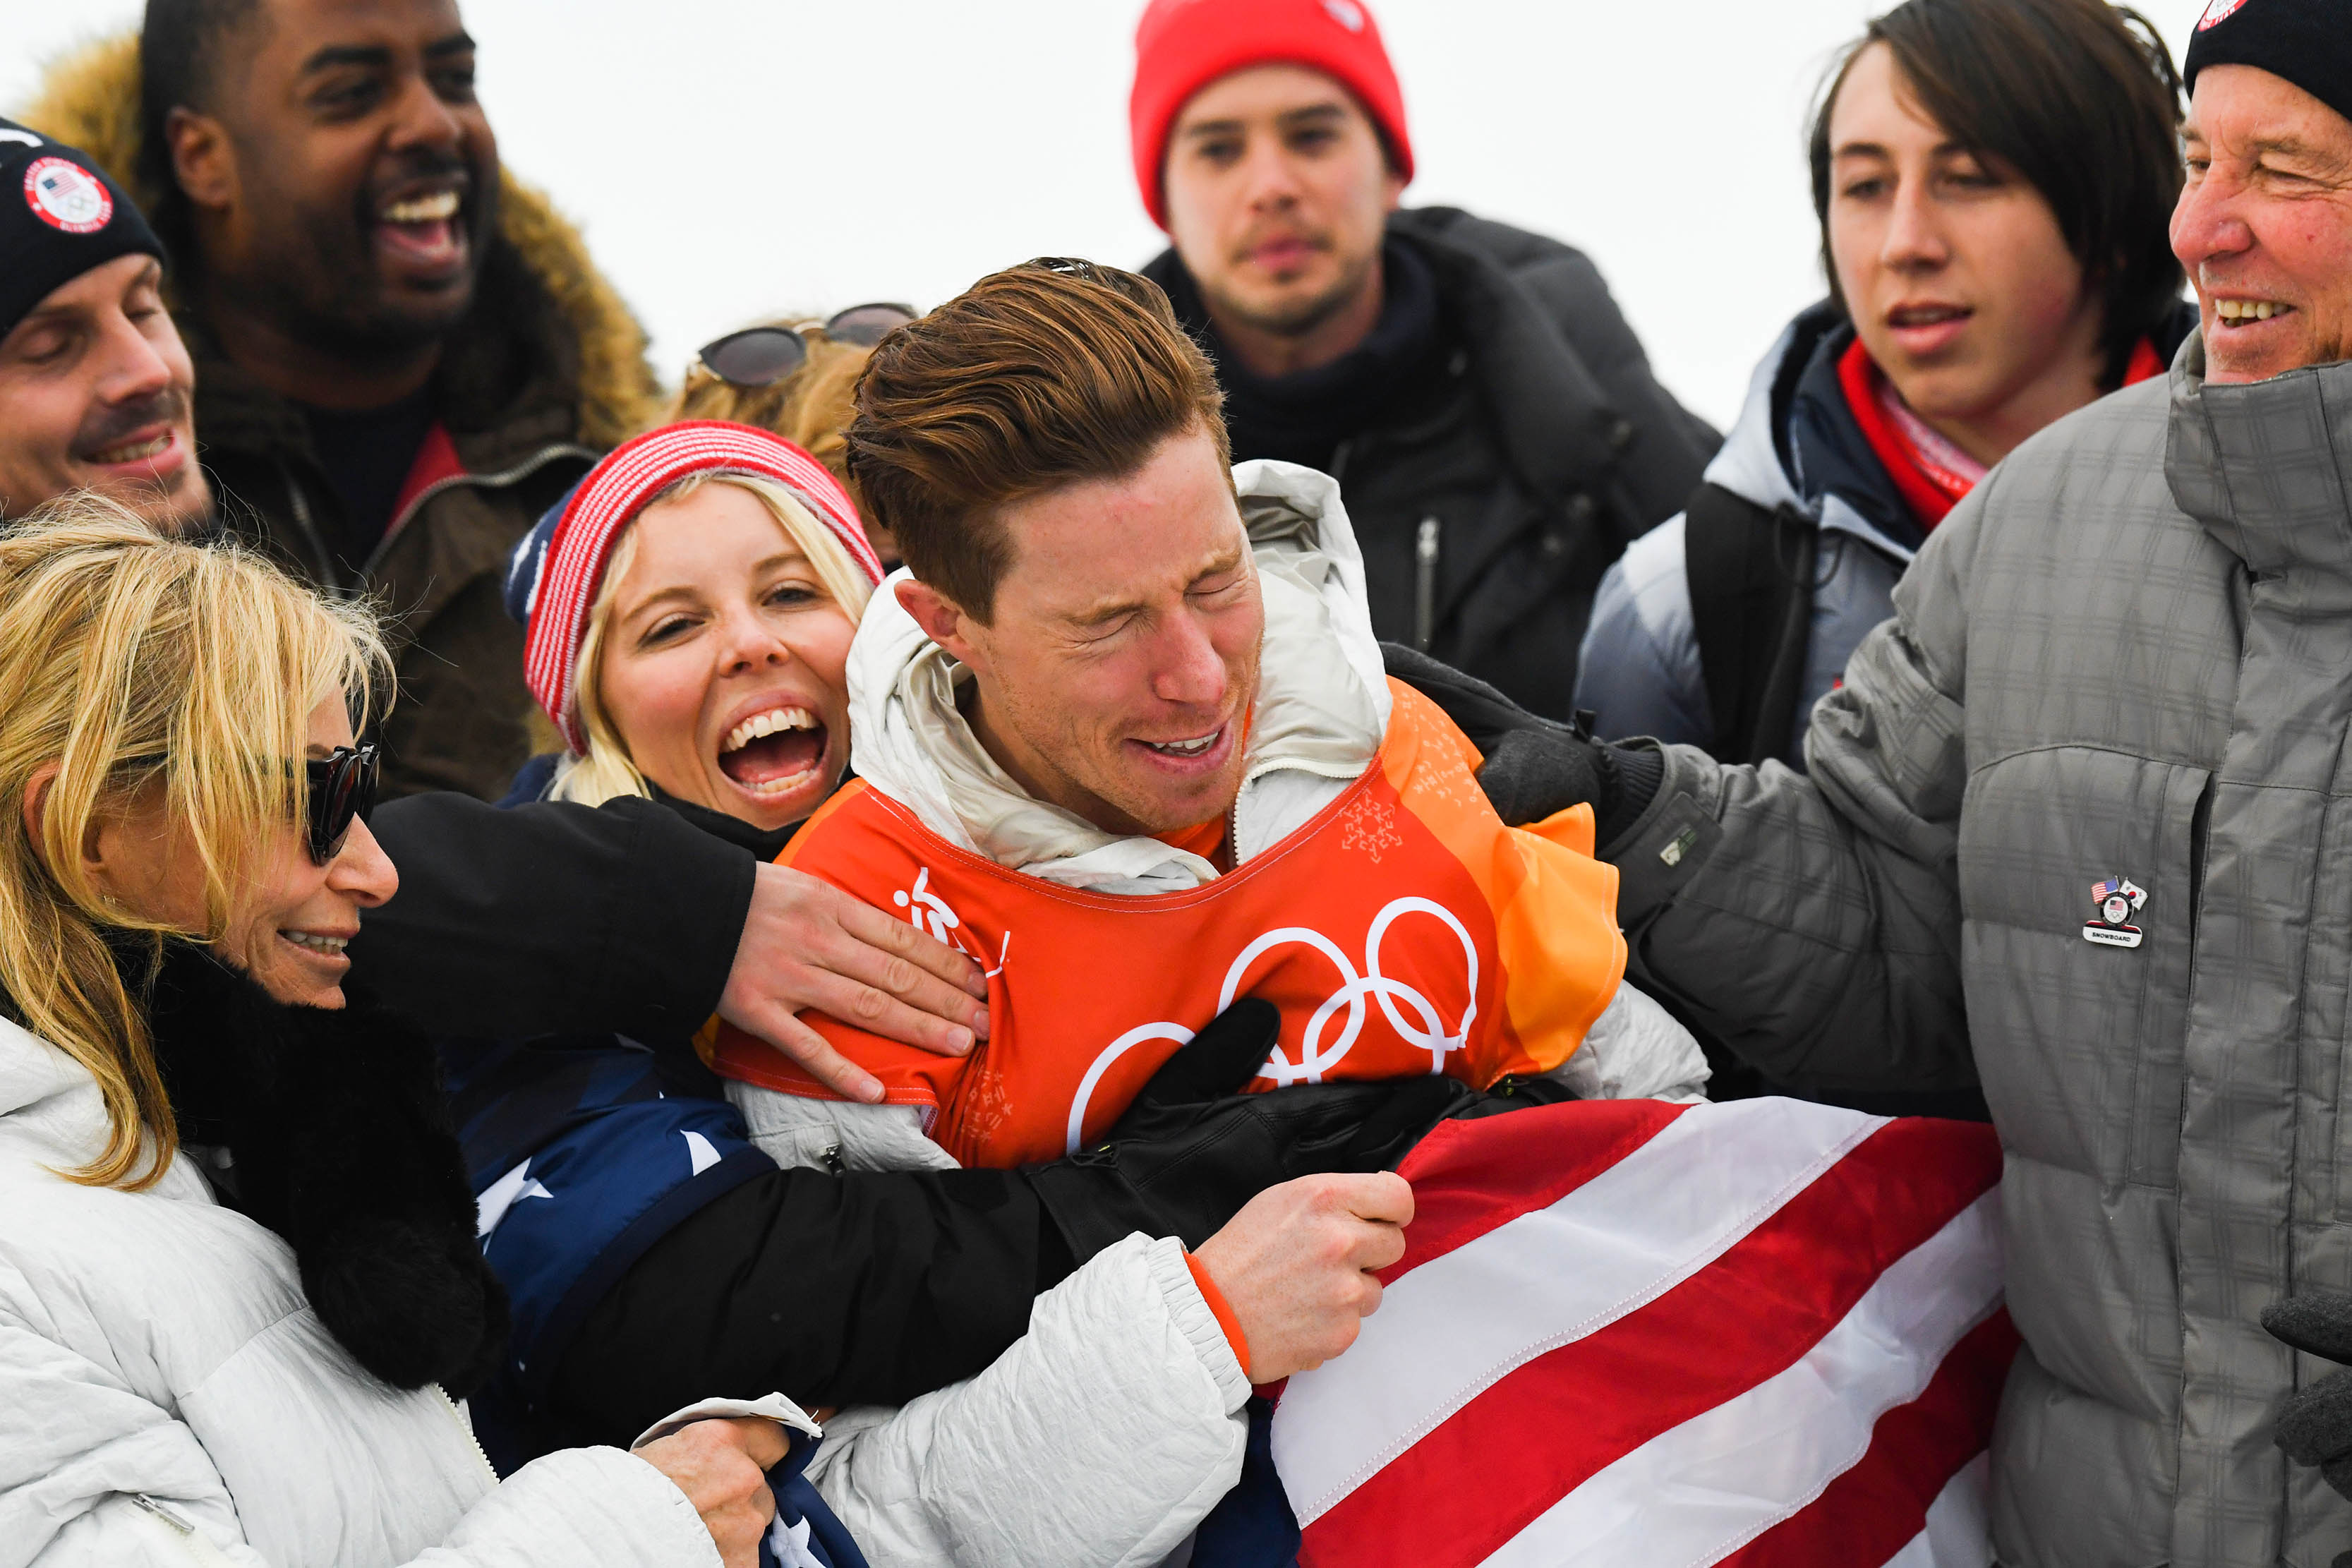 Shaun White wins gold medal in men's halfpipe at 2018 Winter